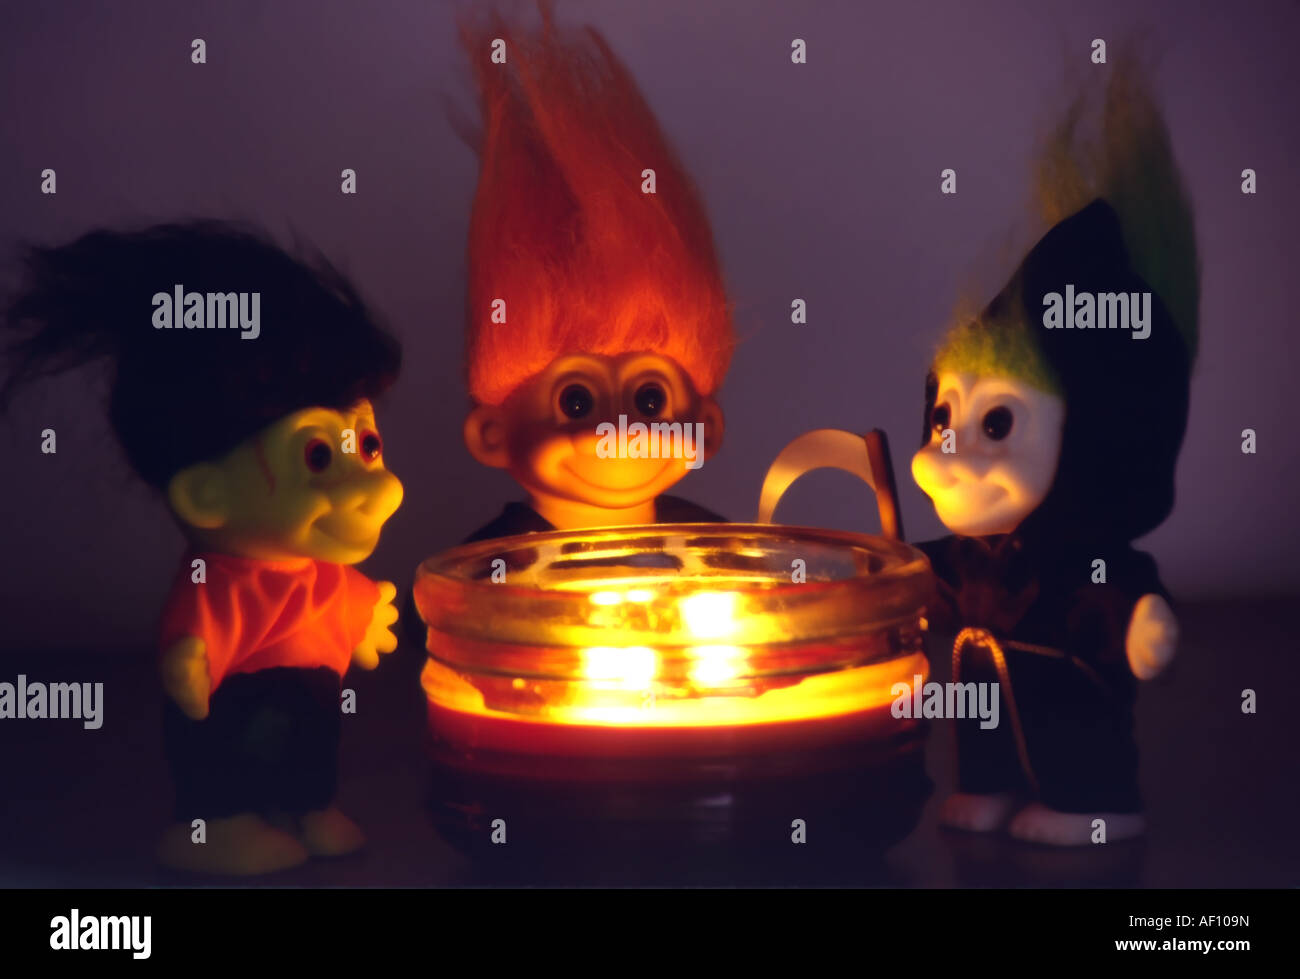 trollingHalloween knick knacks by candlelight make a good holiday themed still life. Stock Photo